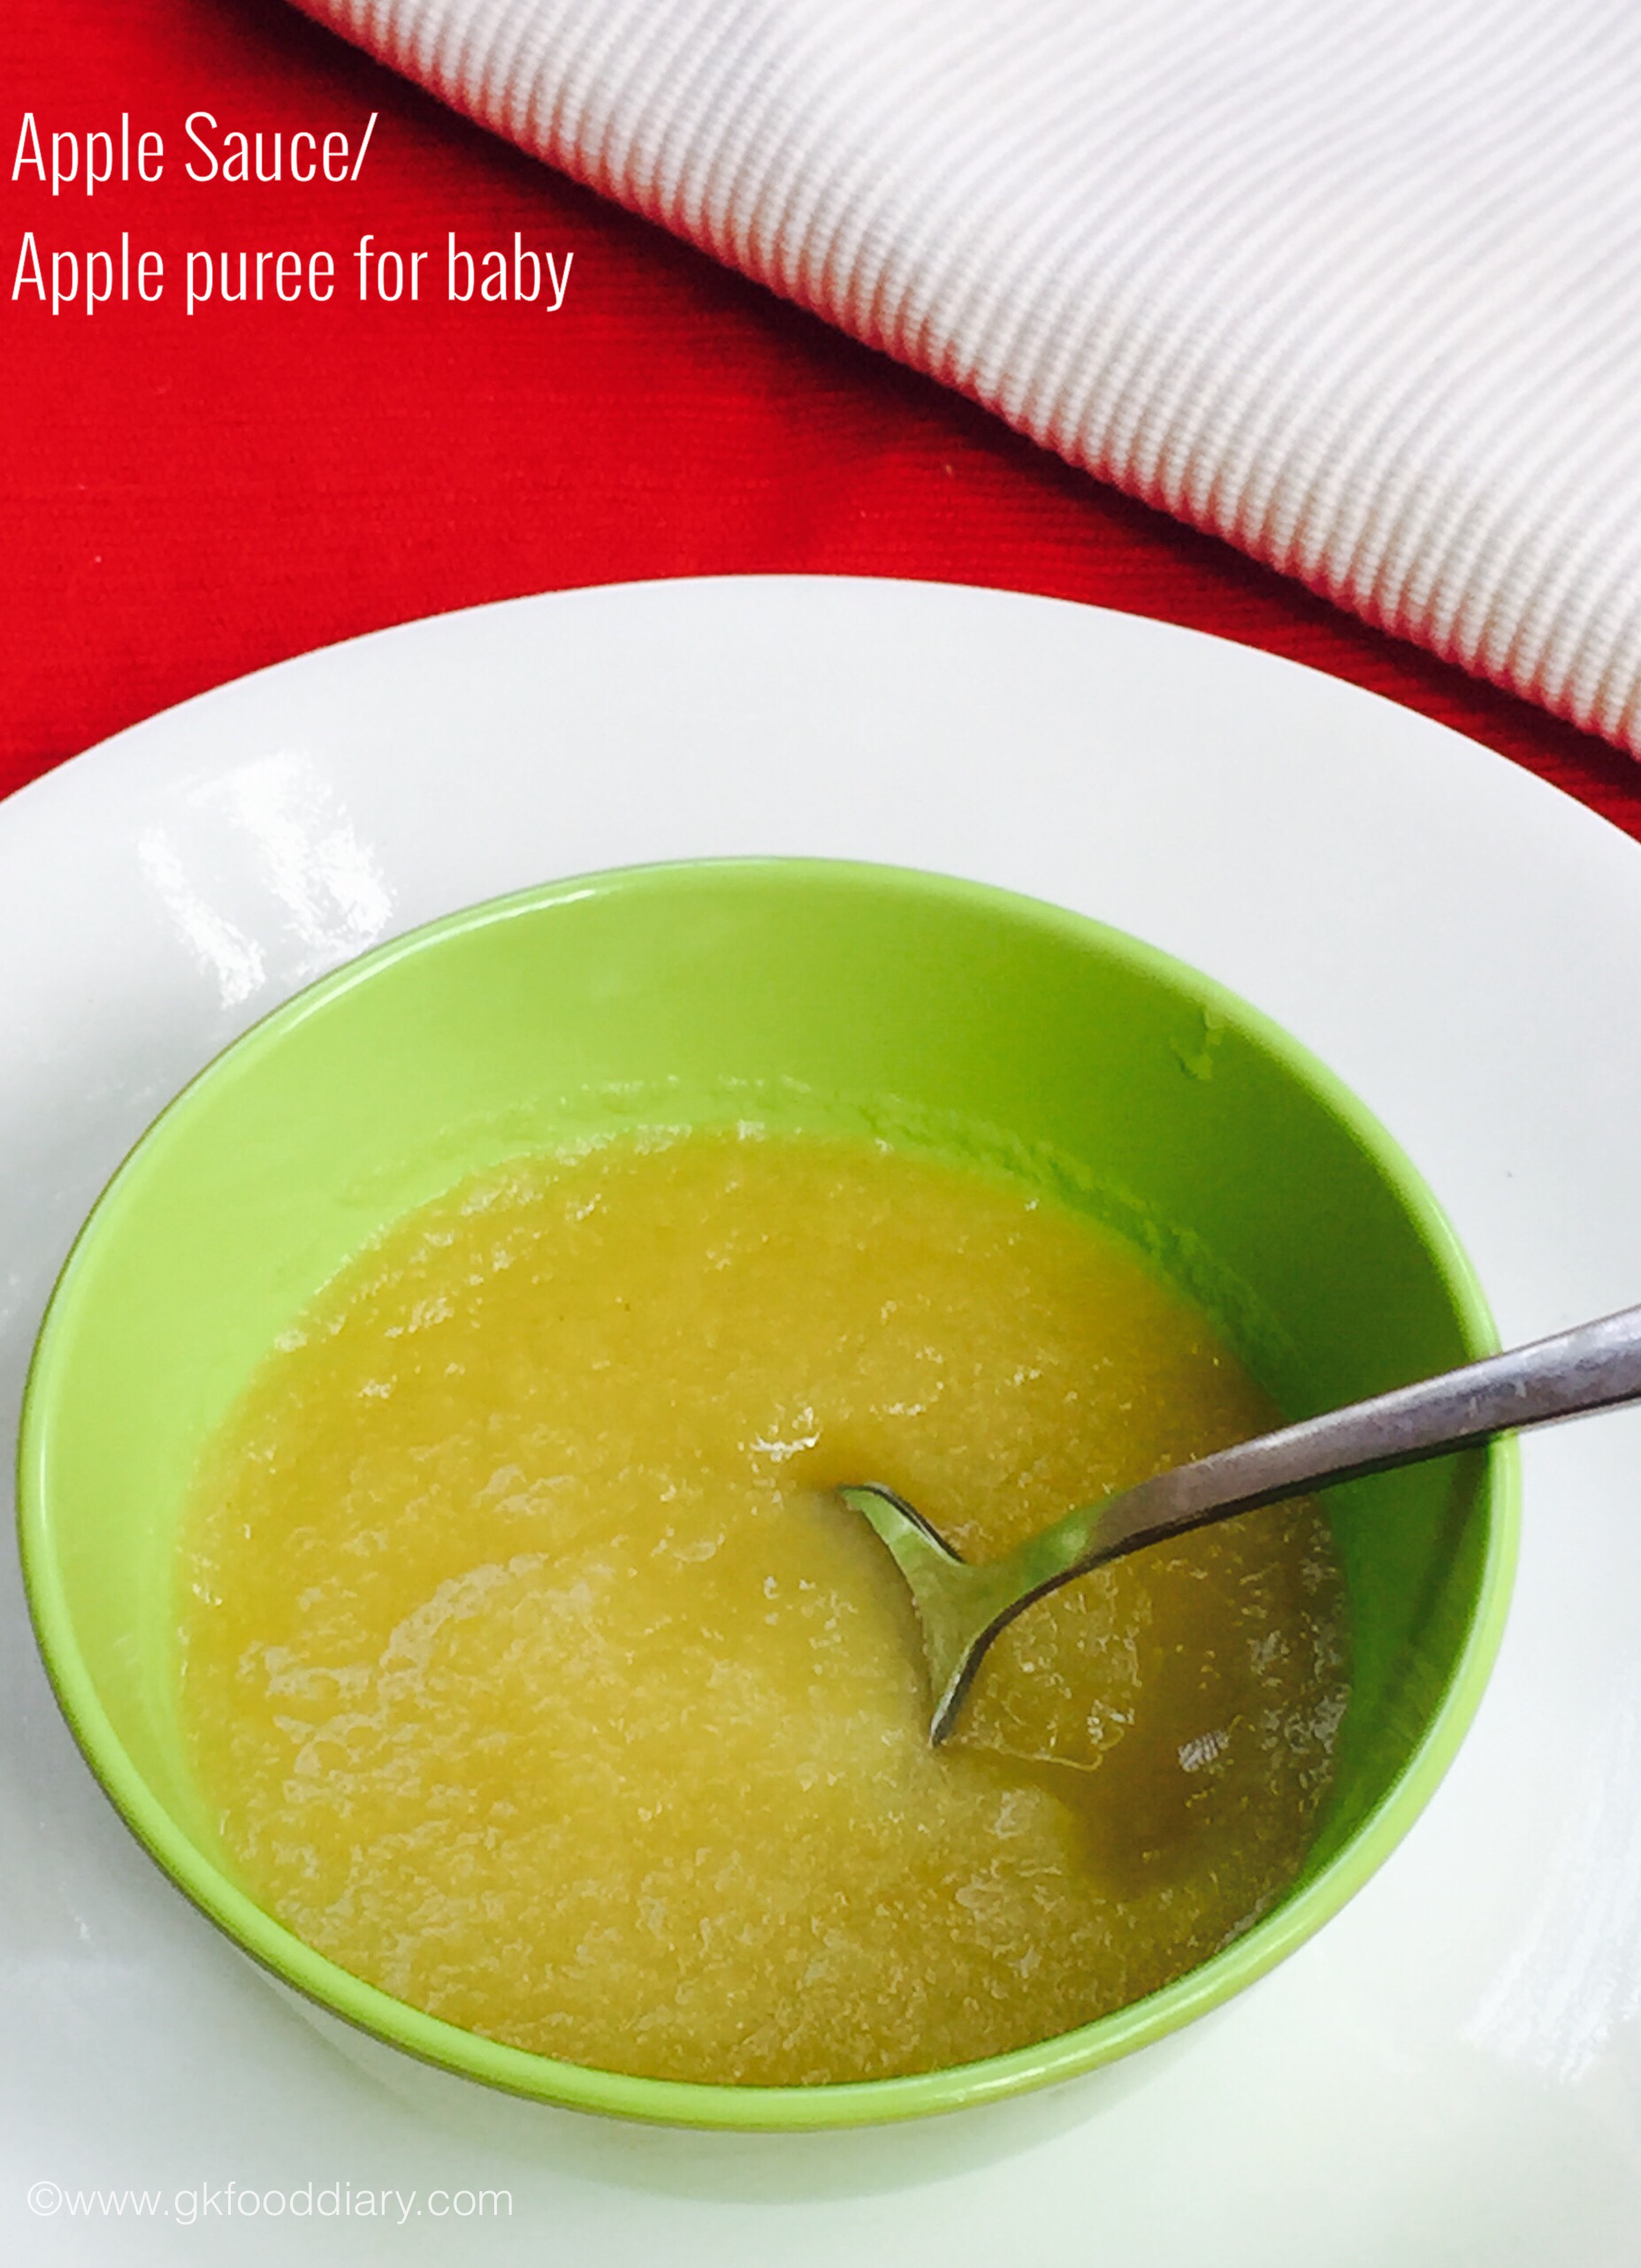 Apple Sauce for baby4